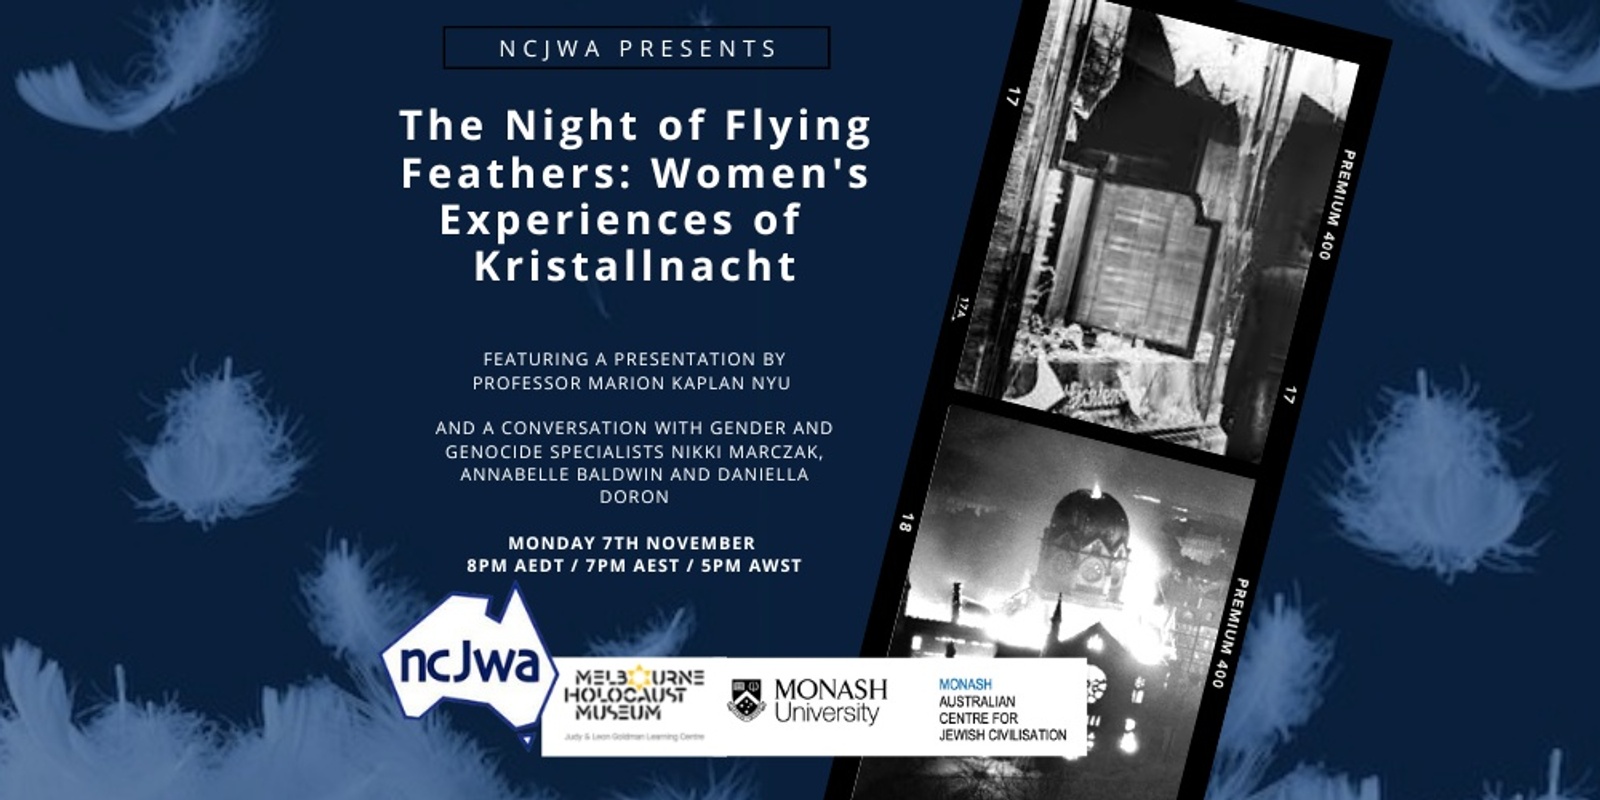 The Night of Flying Feathers: Women's Experiences of Kristallnacht